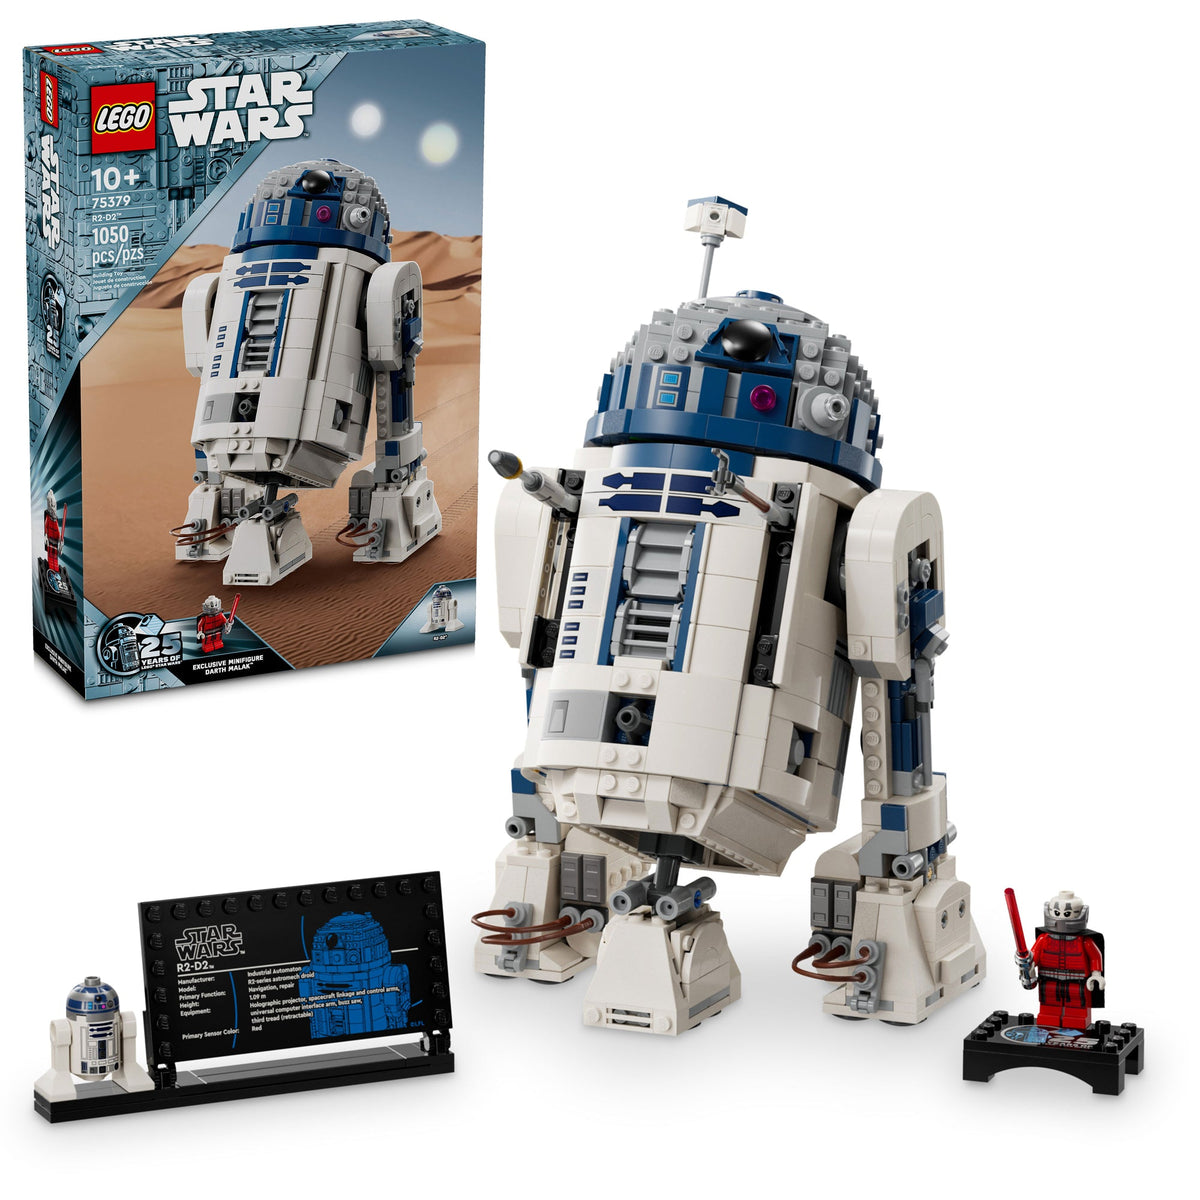 LEGO Toys & Games LEGO Star Wars R2-D2, 75379, Ages 10+, 1050 Pieces